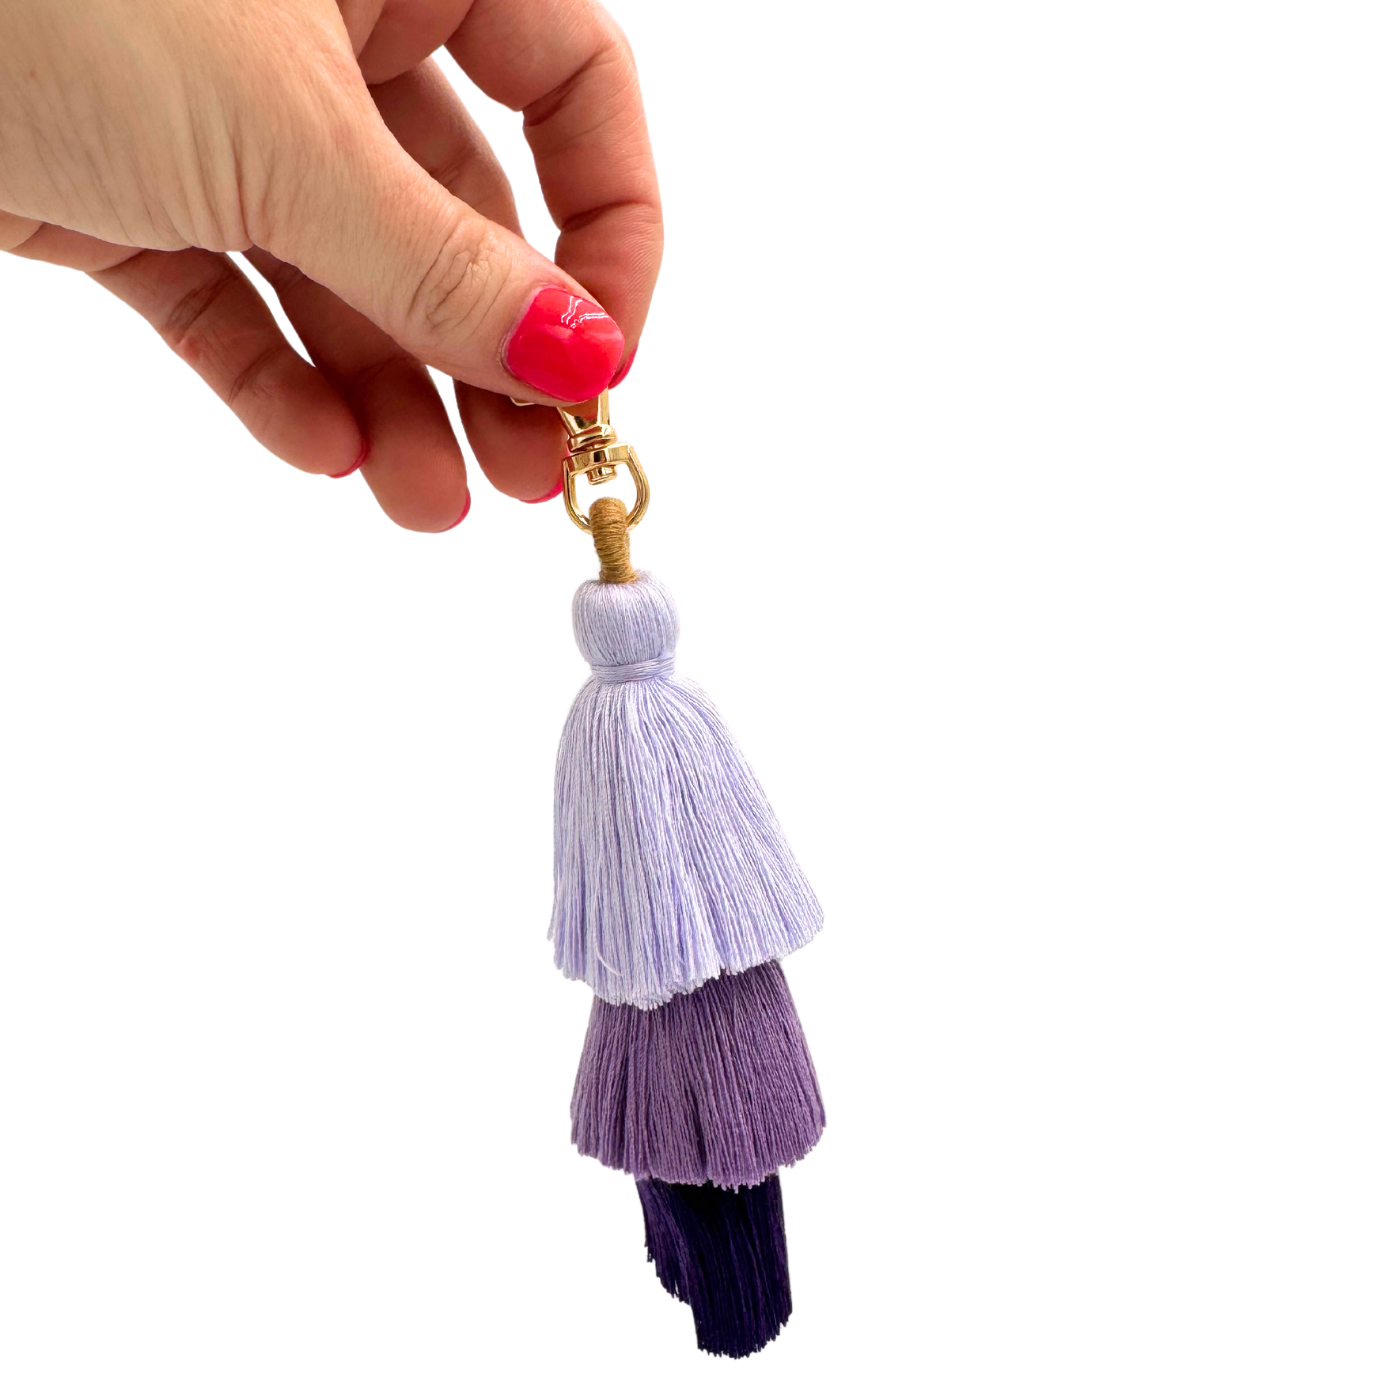 TASSEL | MANY COLORS & STYLES | Perfect Boho Accessory for Mahjong Tile Bags, Tote, Case or any Bag